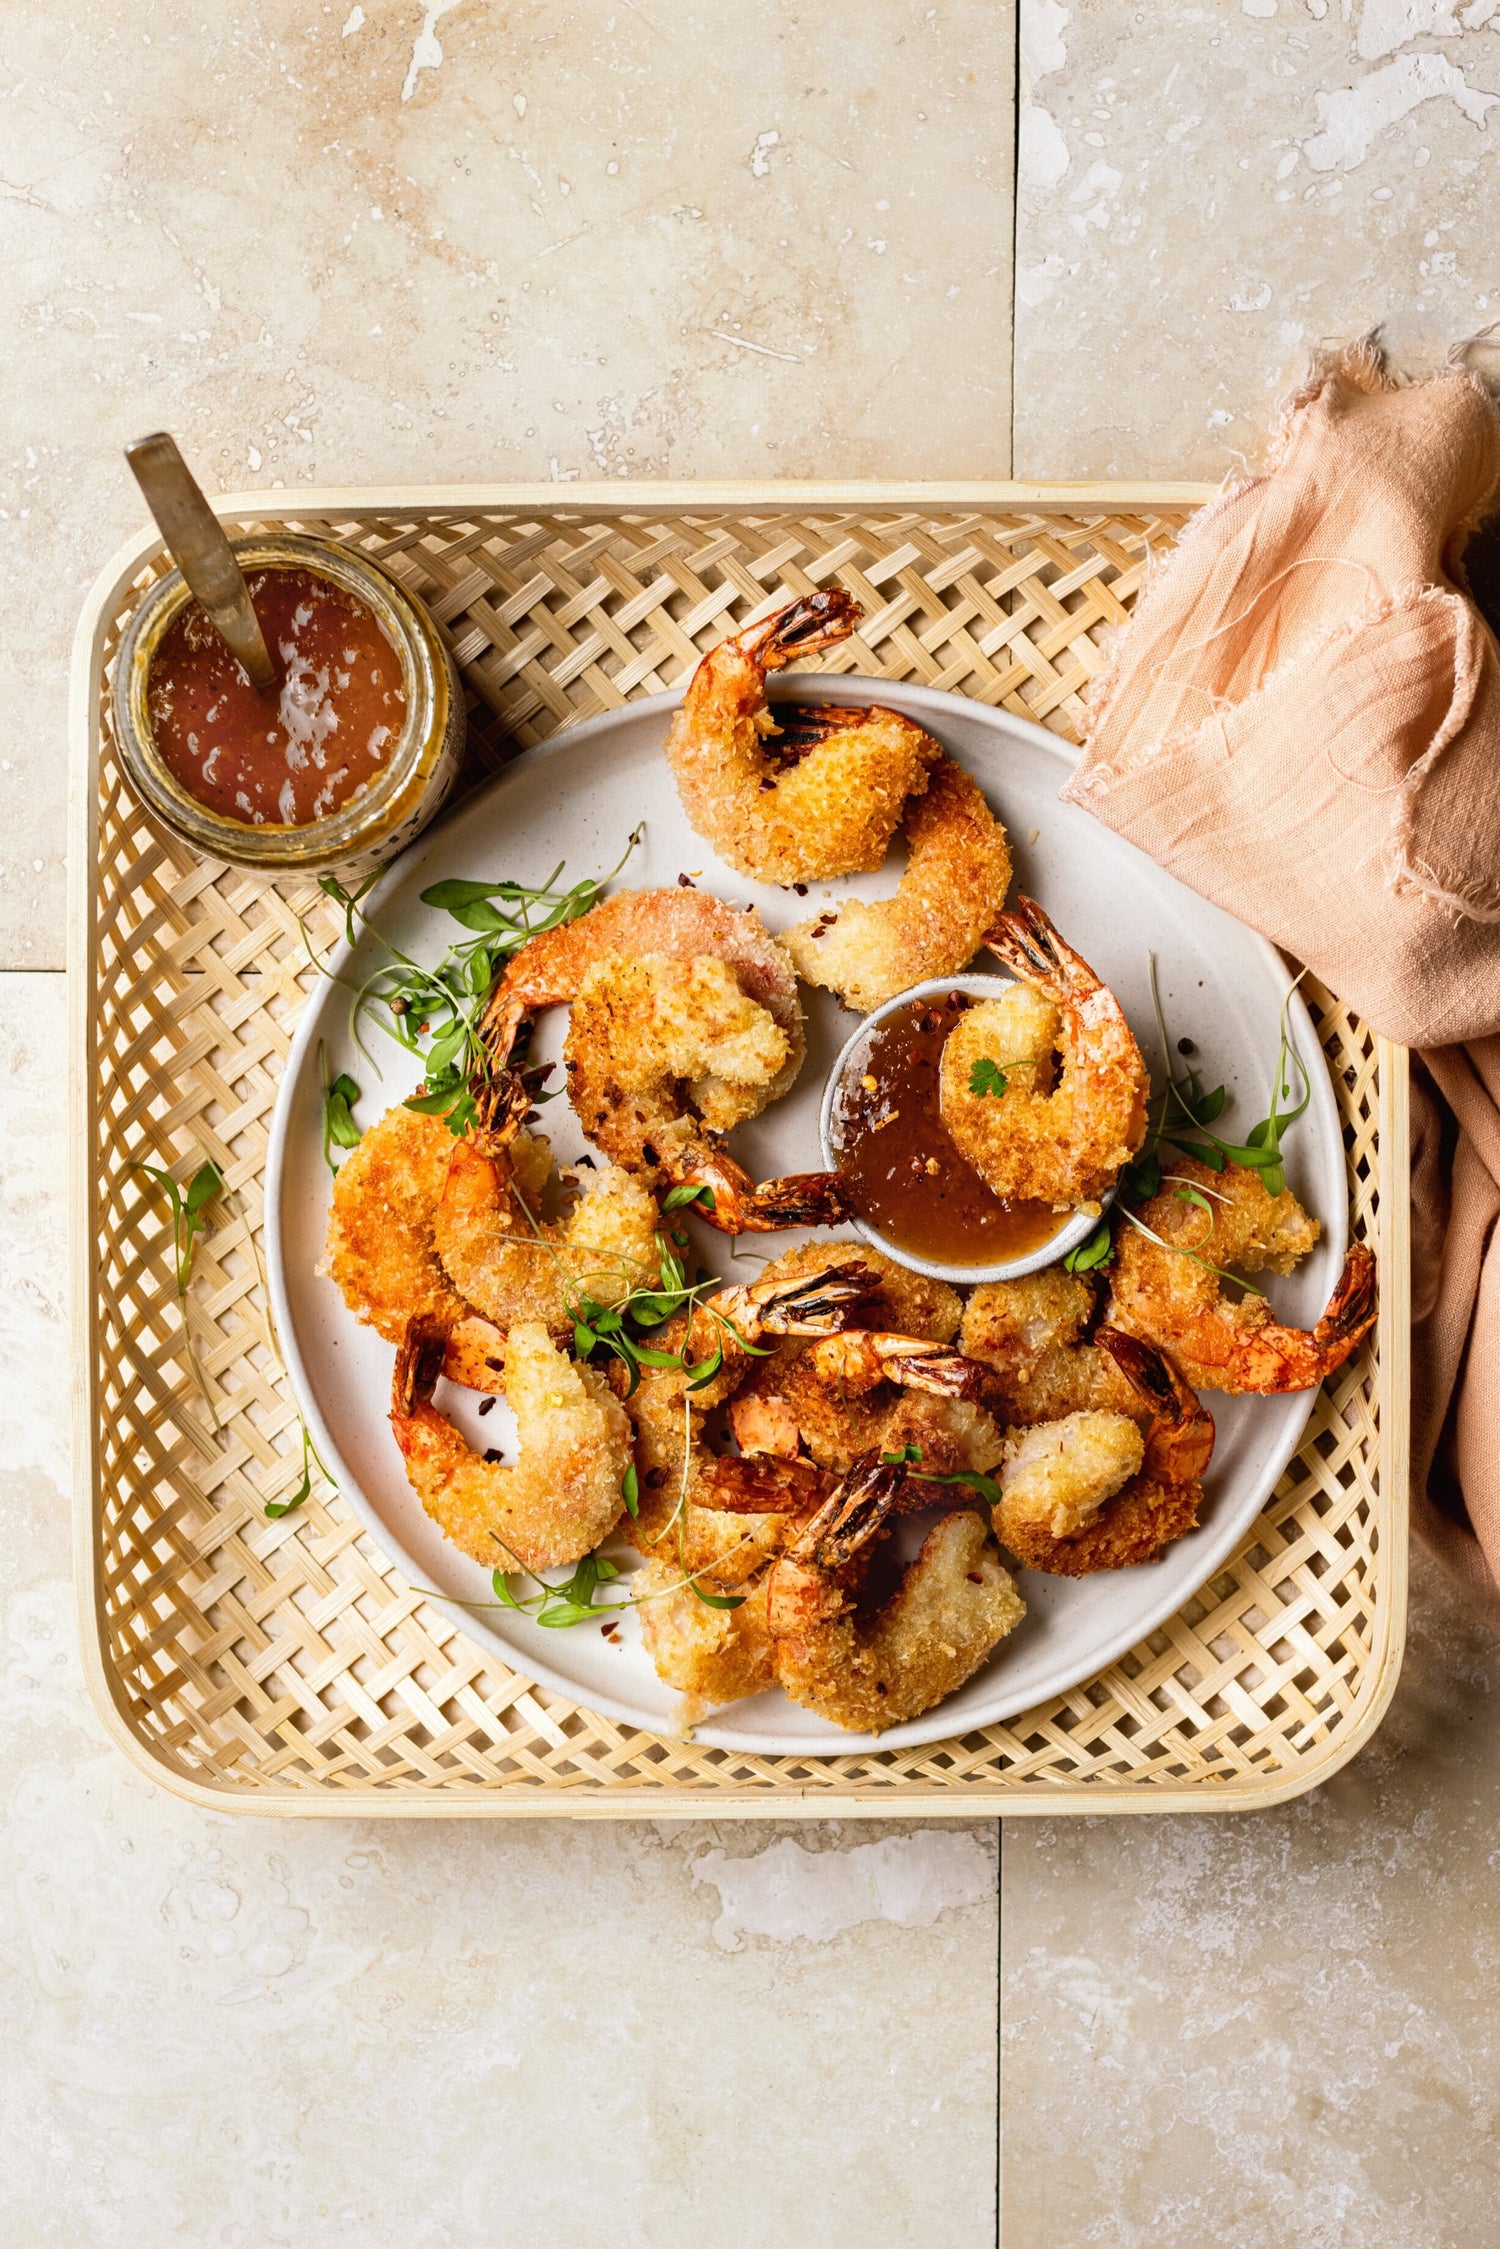 Plate of coconut-crusted shrimp with one shrimp dunked in a spicy dipping sauce made with Worthy’s Earl Grey Lavender Peach jam and red pepper flakes.